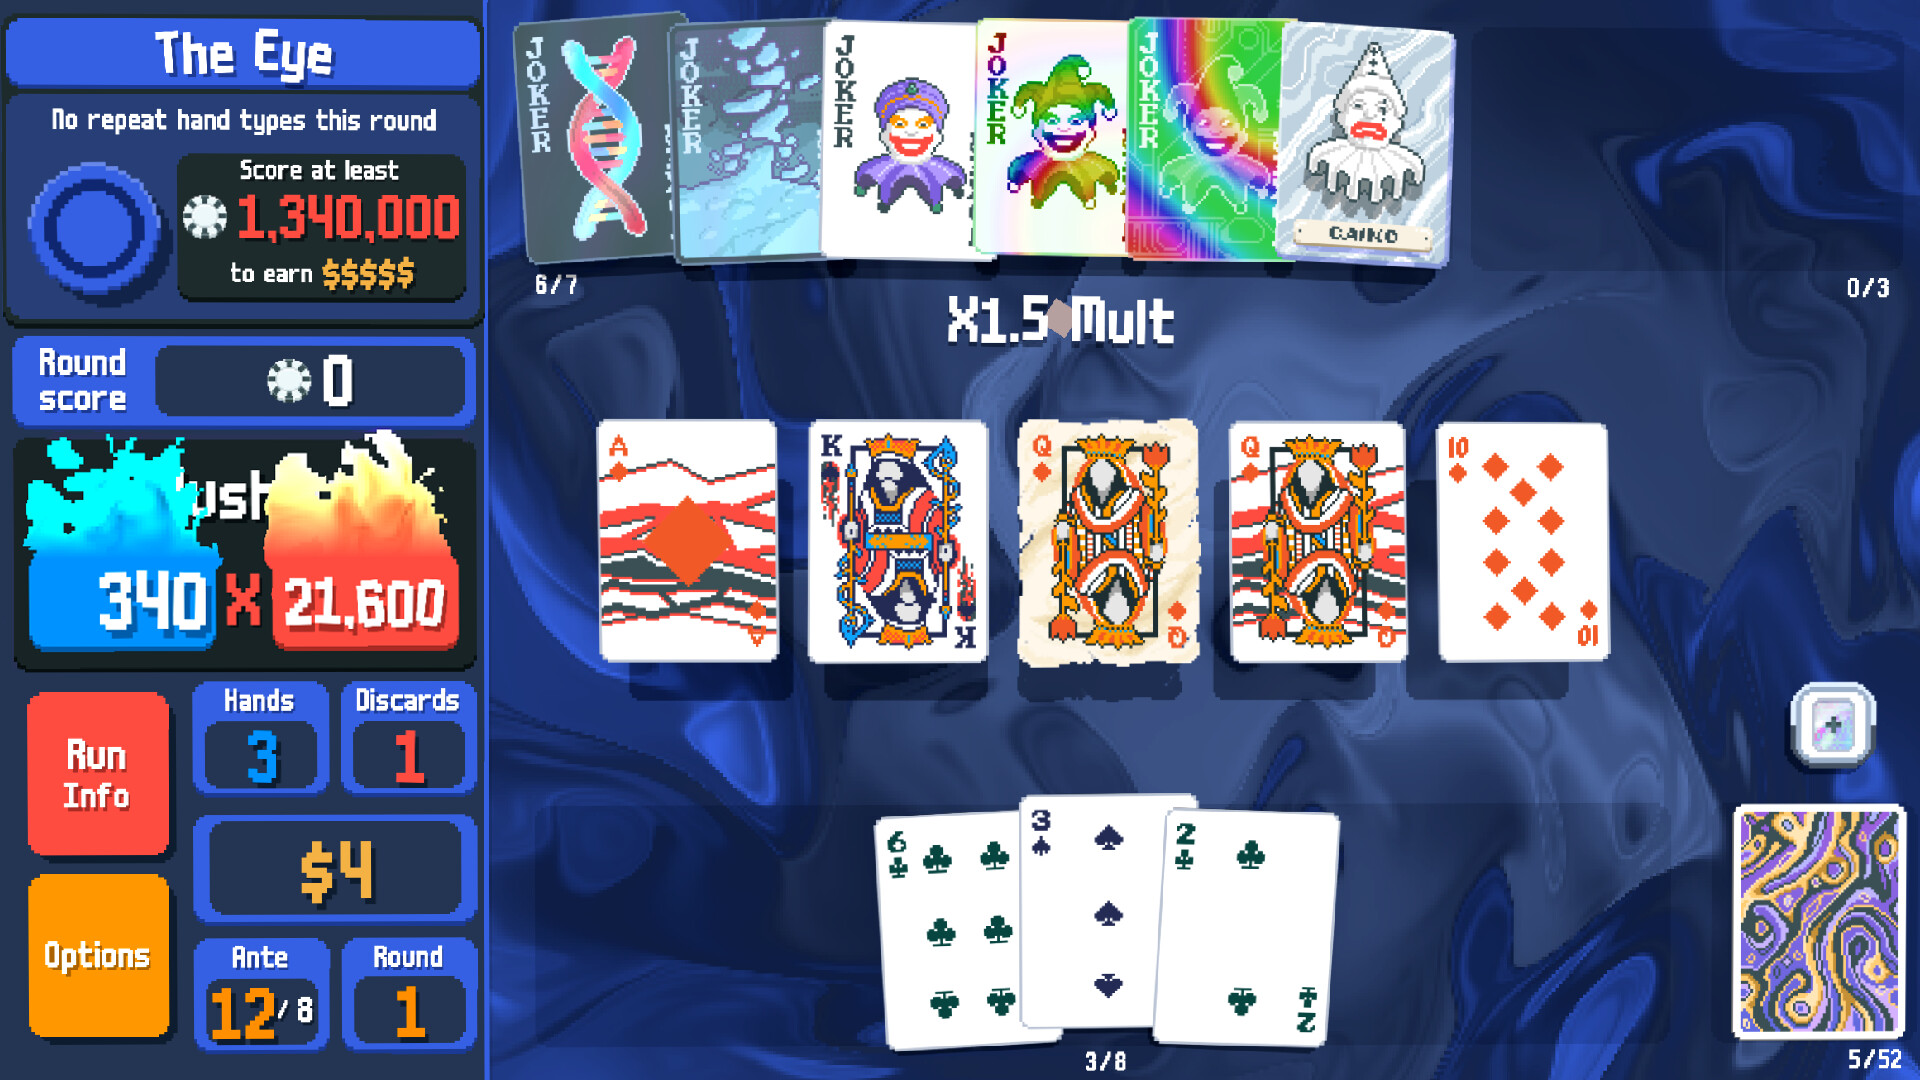 Indie Poker-Like Game 'Balatro' Has Sold More Than 500,000 Copies in Two  Weeks - Bloomberg